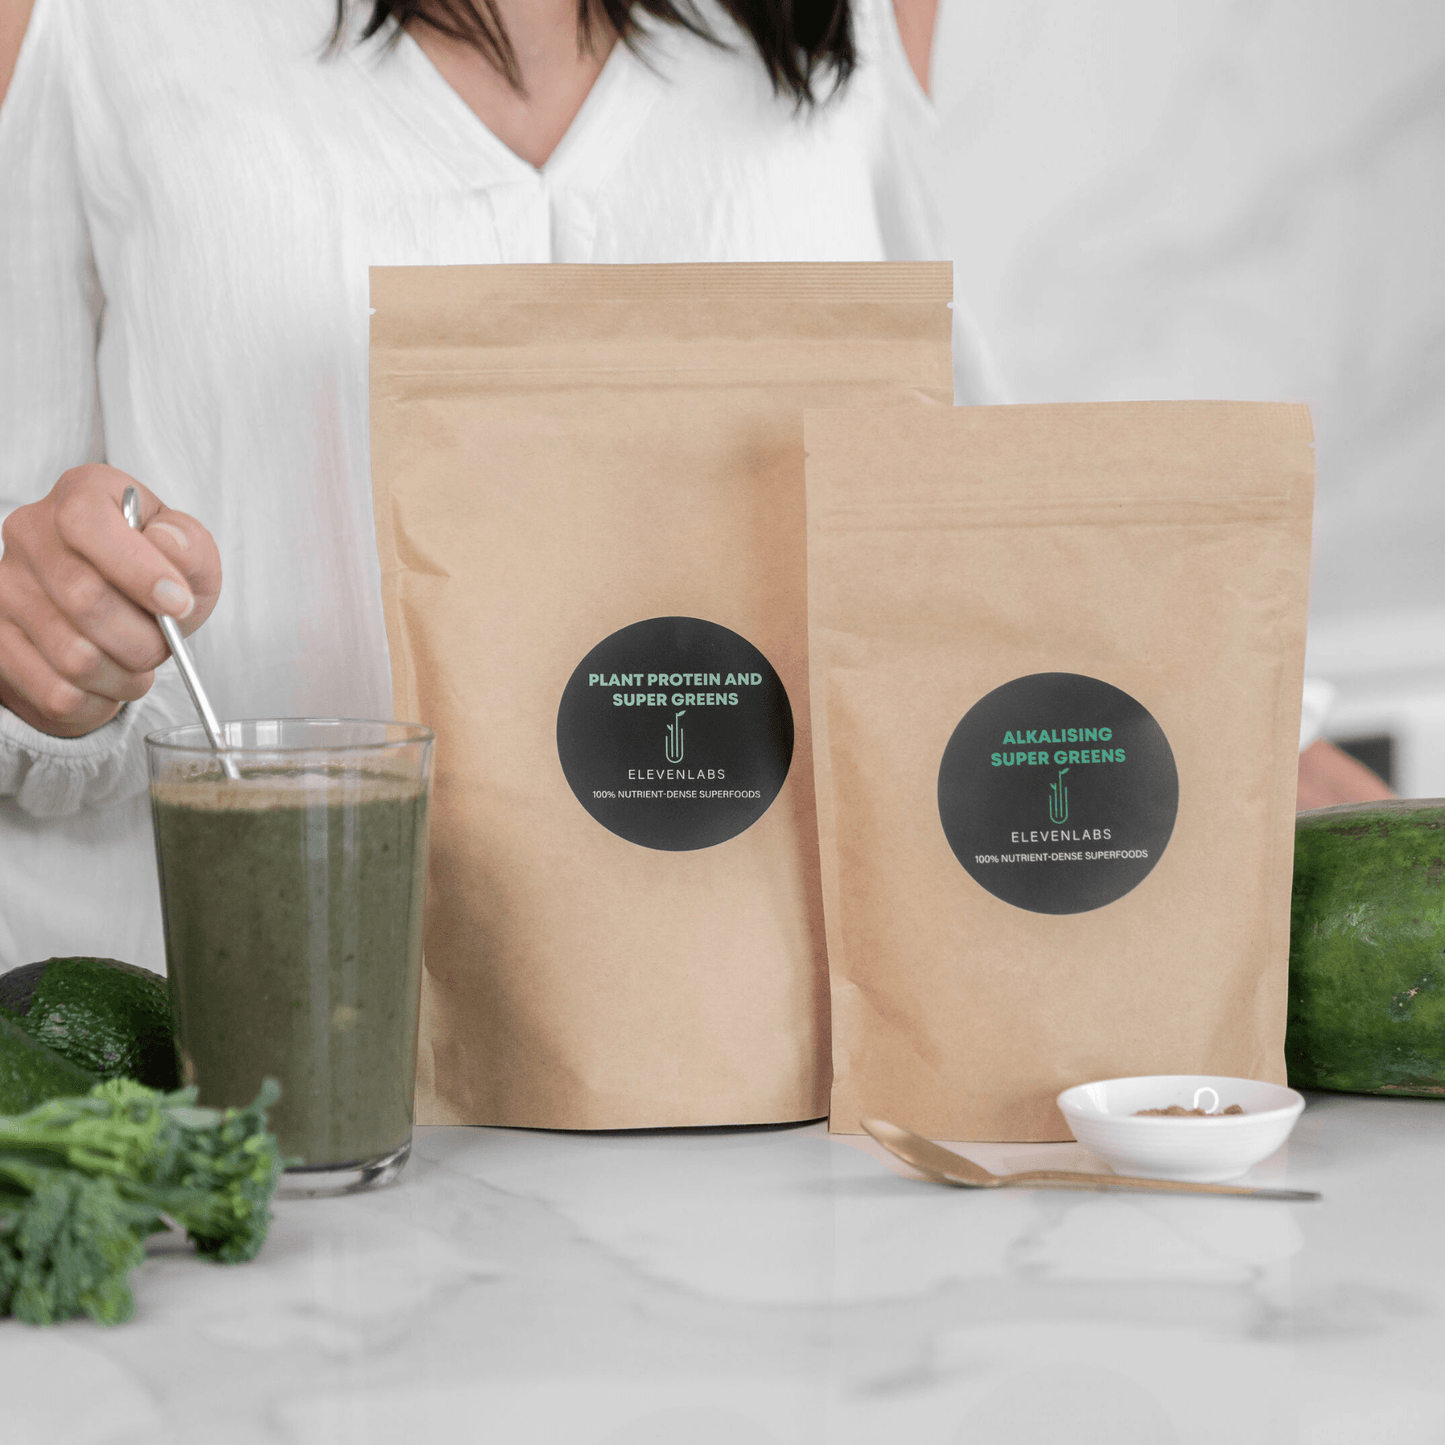 ElevenLabs 14 Day Detox Bundle with FREE Detox Meal Plan Recipe eBook - SAVE $50! - ElevenLabs - 100% Organic Vegan Plant Protein